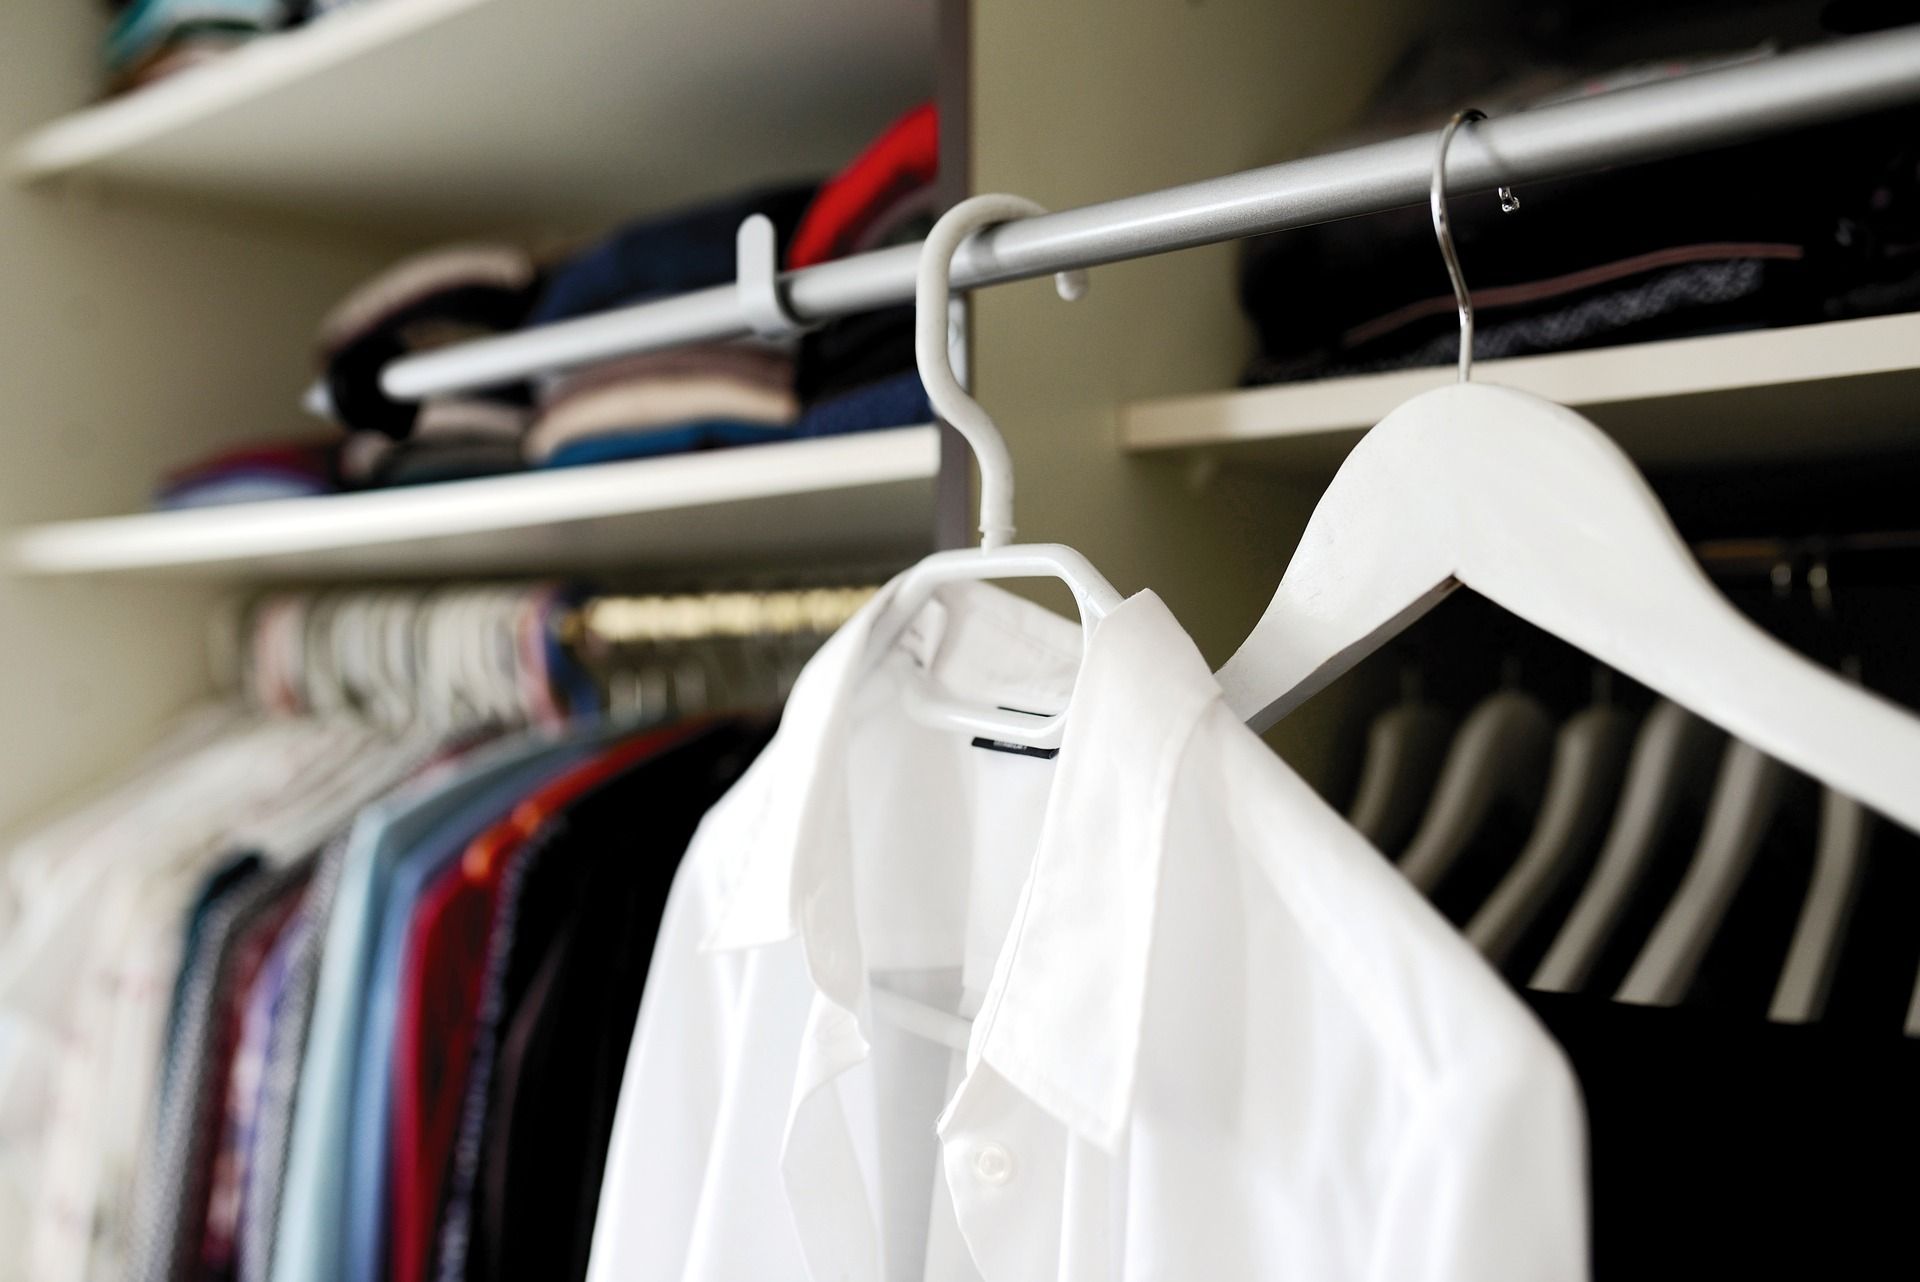 White dress shirt hangs alone on a forefront closet bar with clothing hanging on two bars behind it.